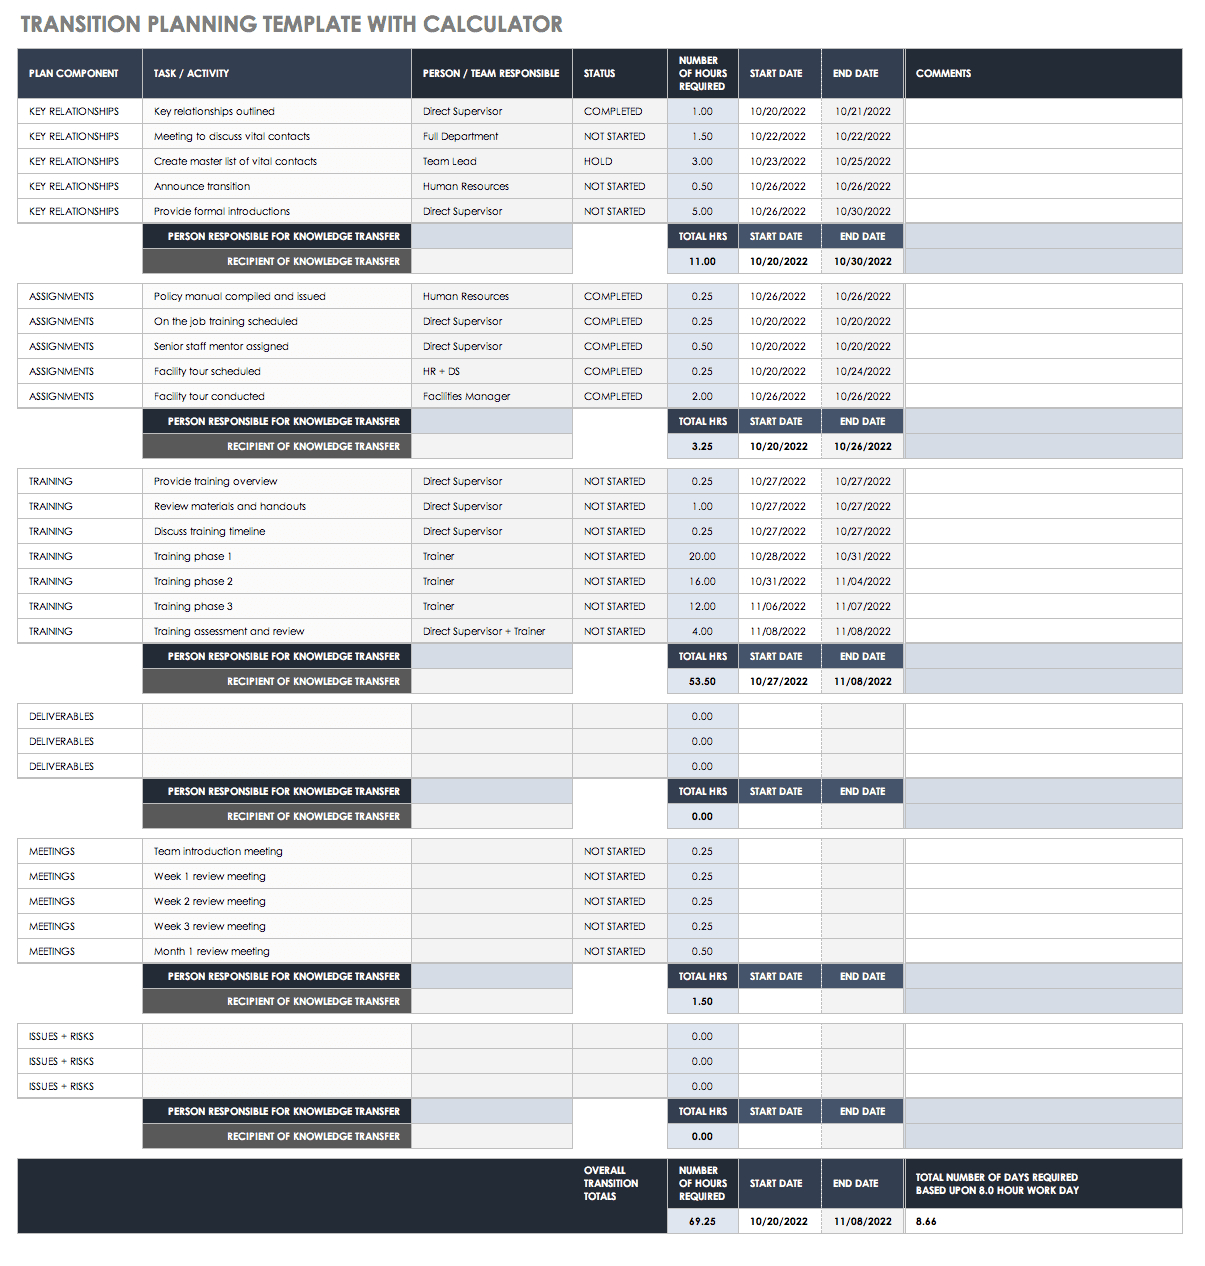 Free Business Transition Plan Templates | Smartsheet Throughout Job Transition Plan Template